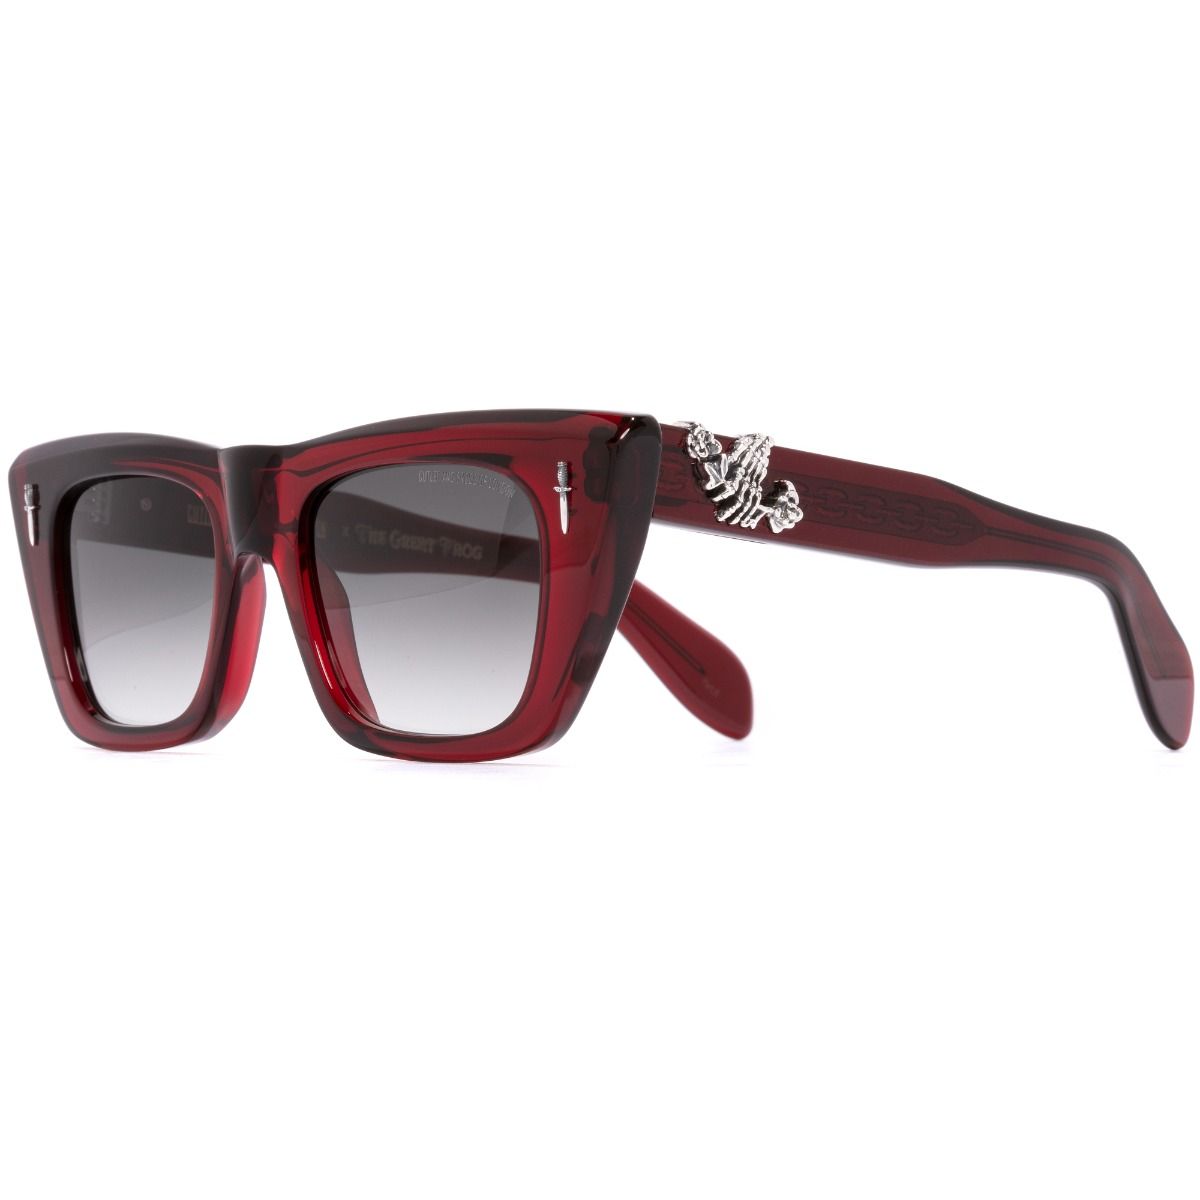 The Great Frog Love And Death Cat Eye Sunglasses-Bordeaux